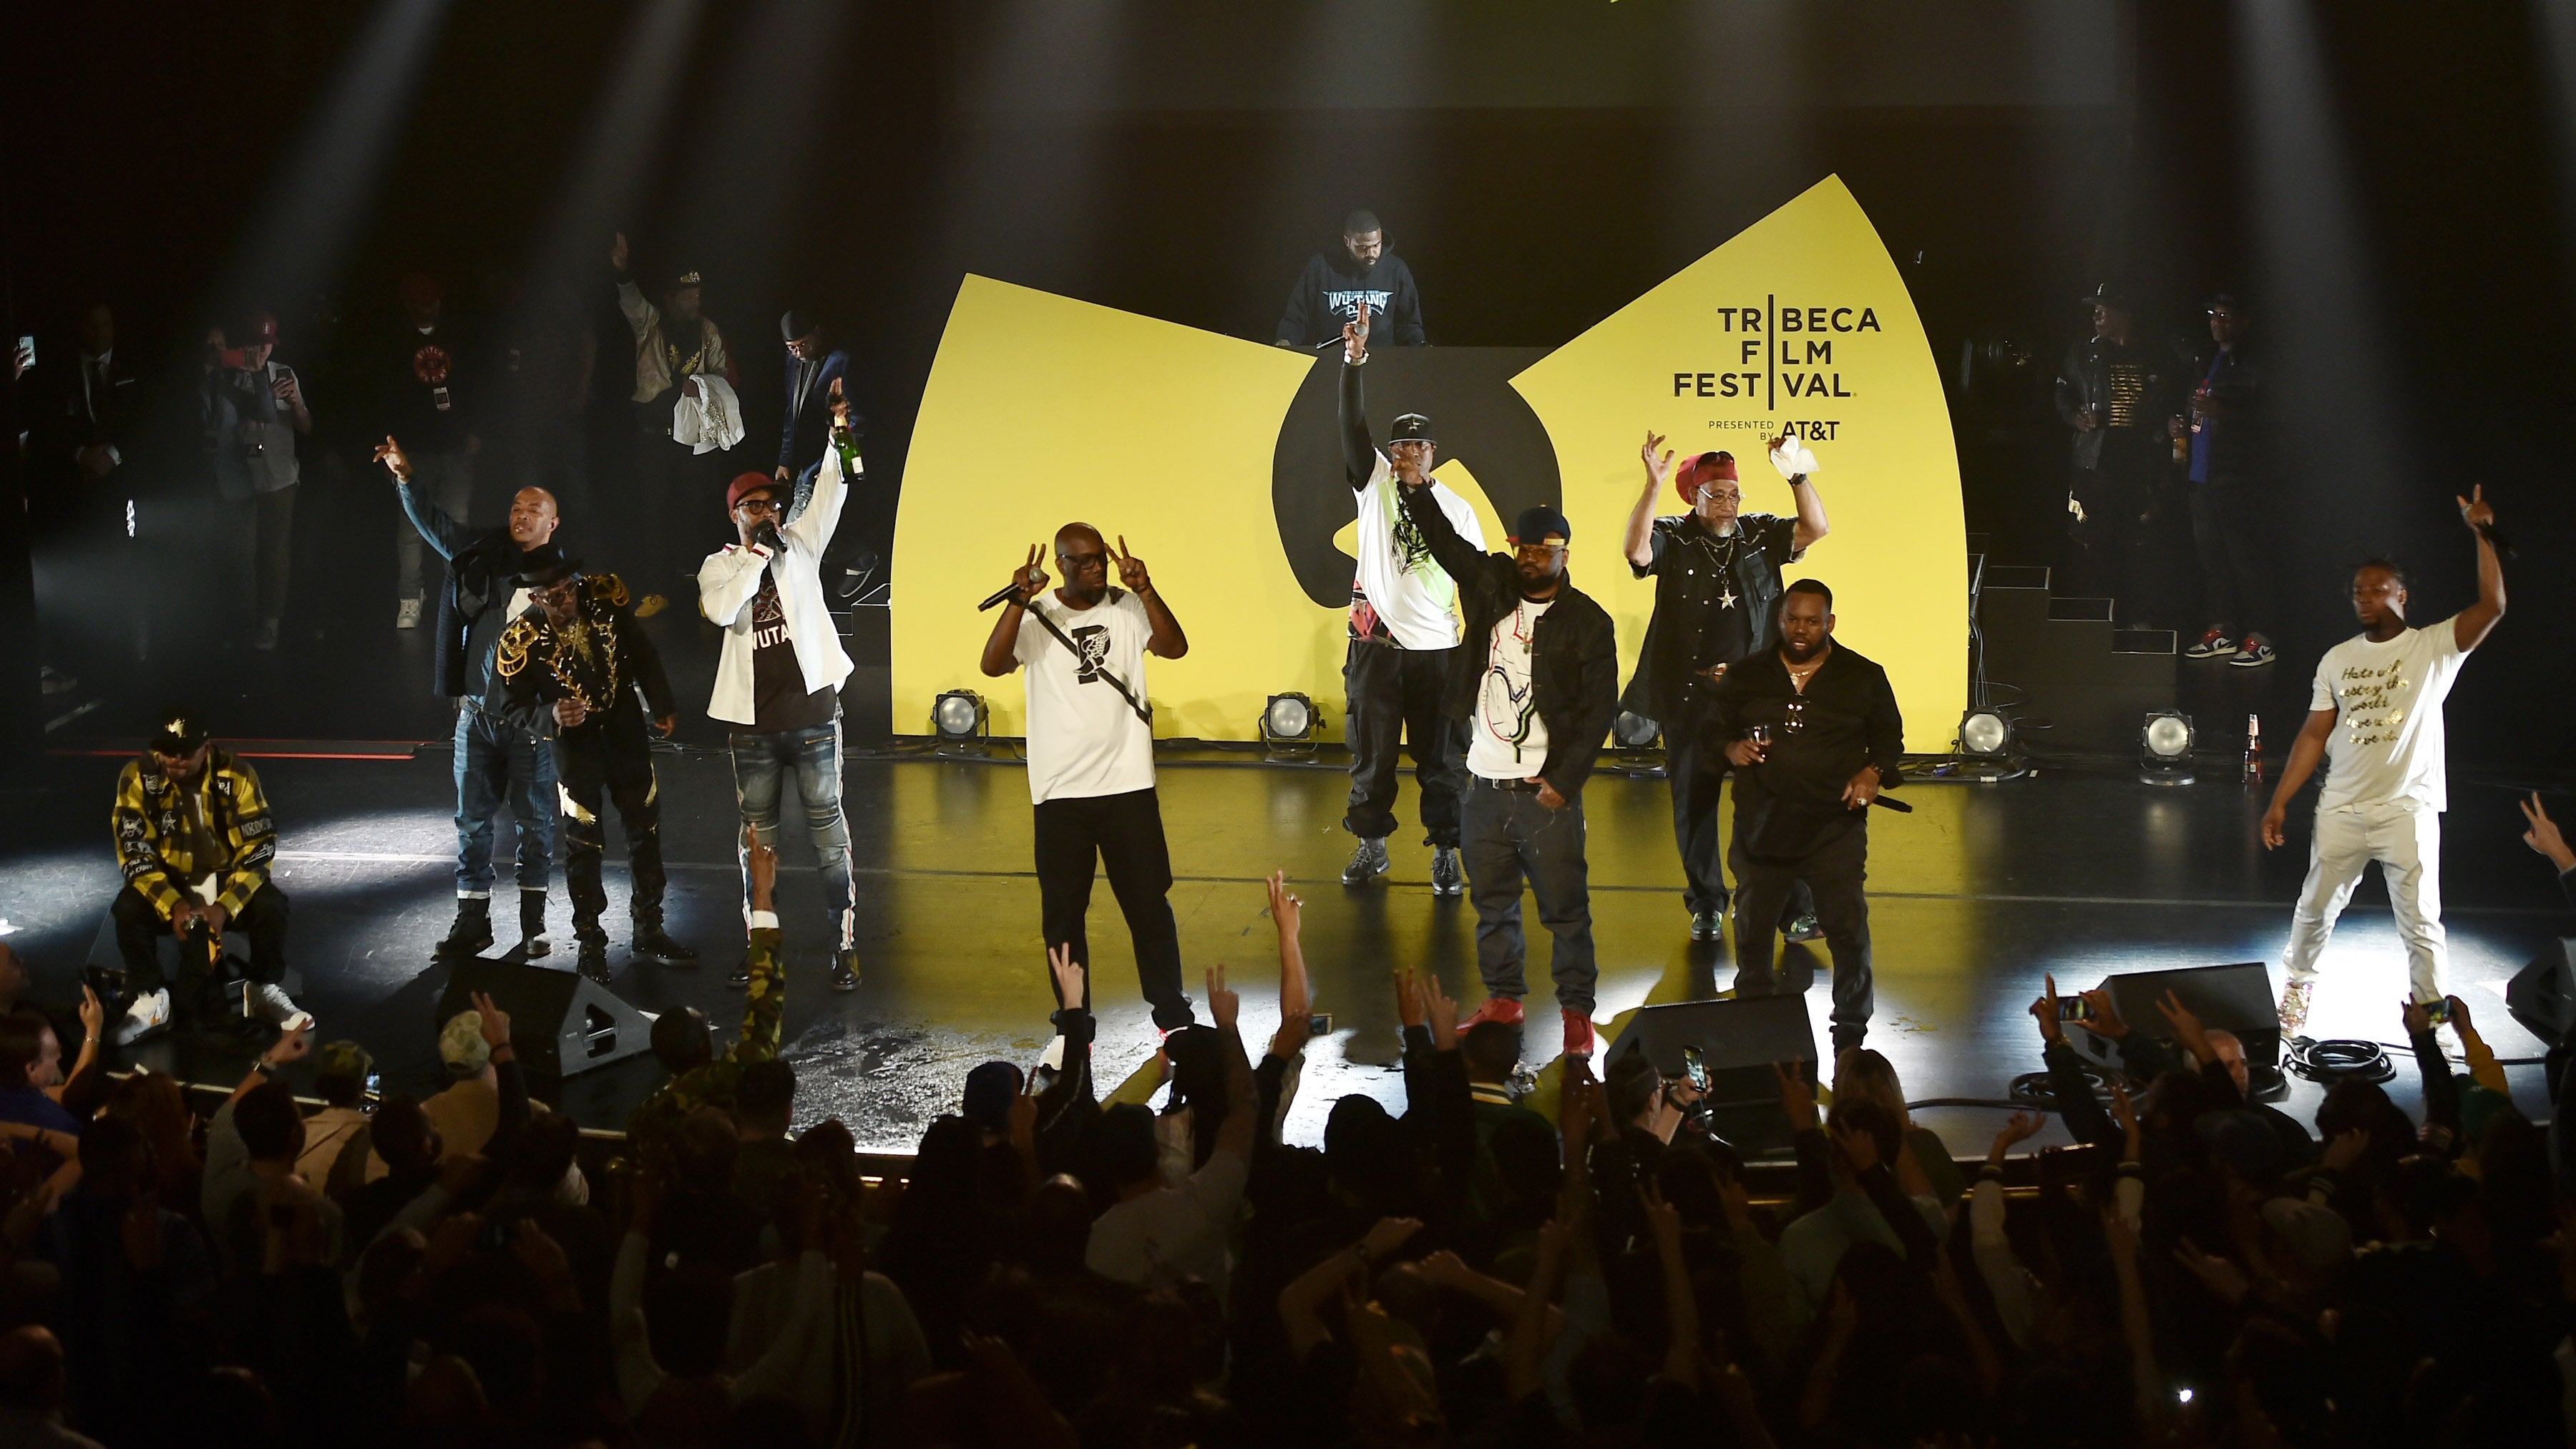 The Wu-Tang Clan performs live during Tribeca TV: Wu-Tang Clan: Of Mics And Men at the 2019 Tribeca Film Festival at Beacon Theatre on April 25, 2019 in New York City.